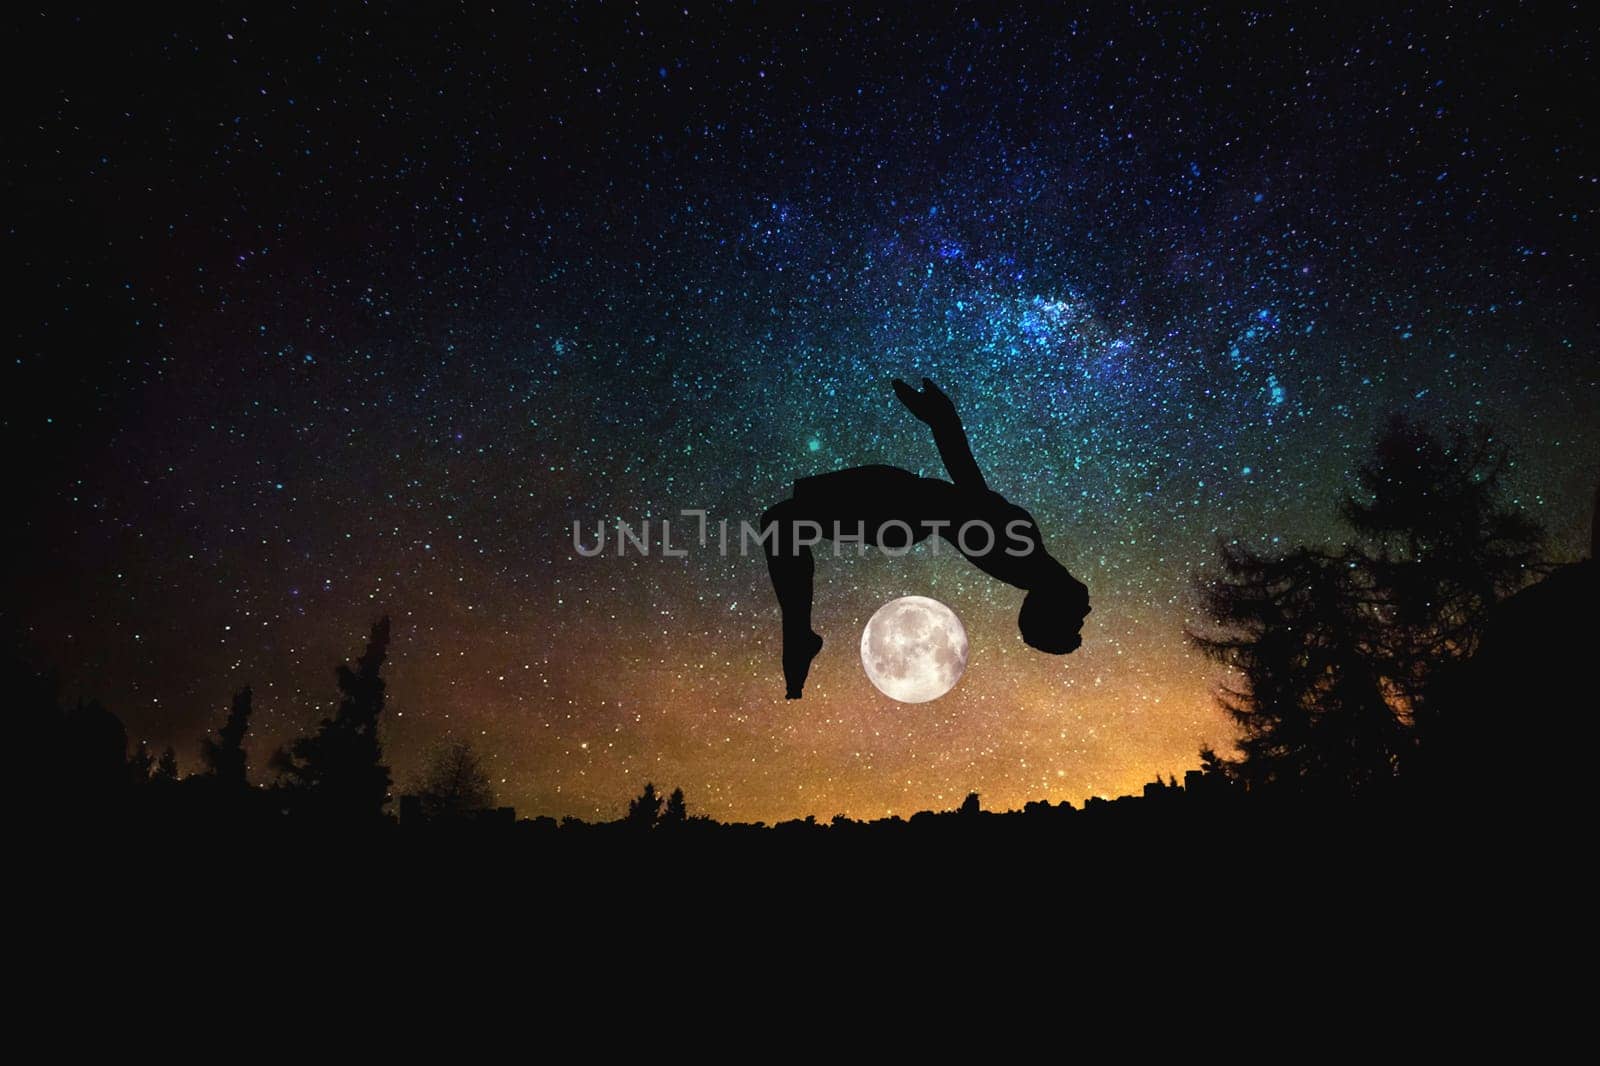 sporty man jumping silhouette at the night starry sky and moon background. Mixed media